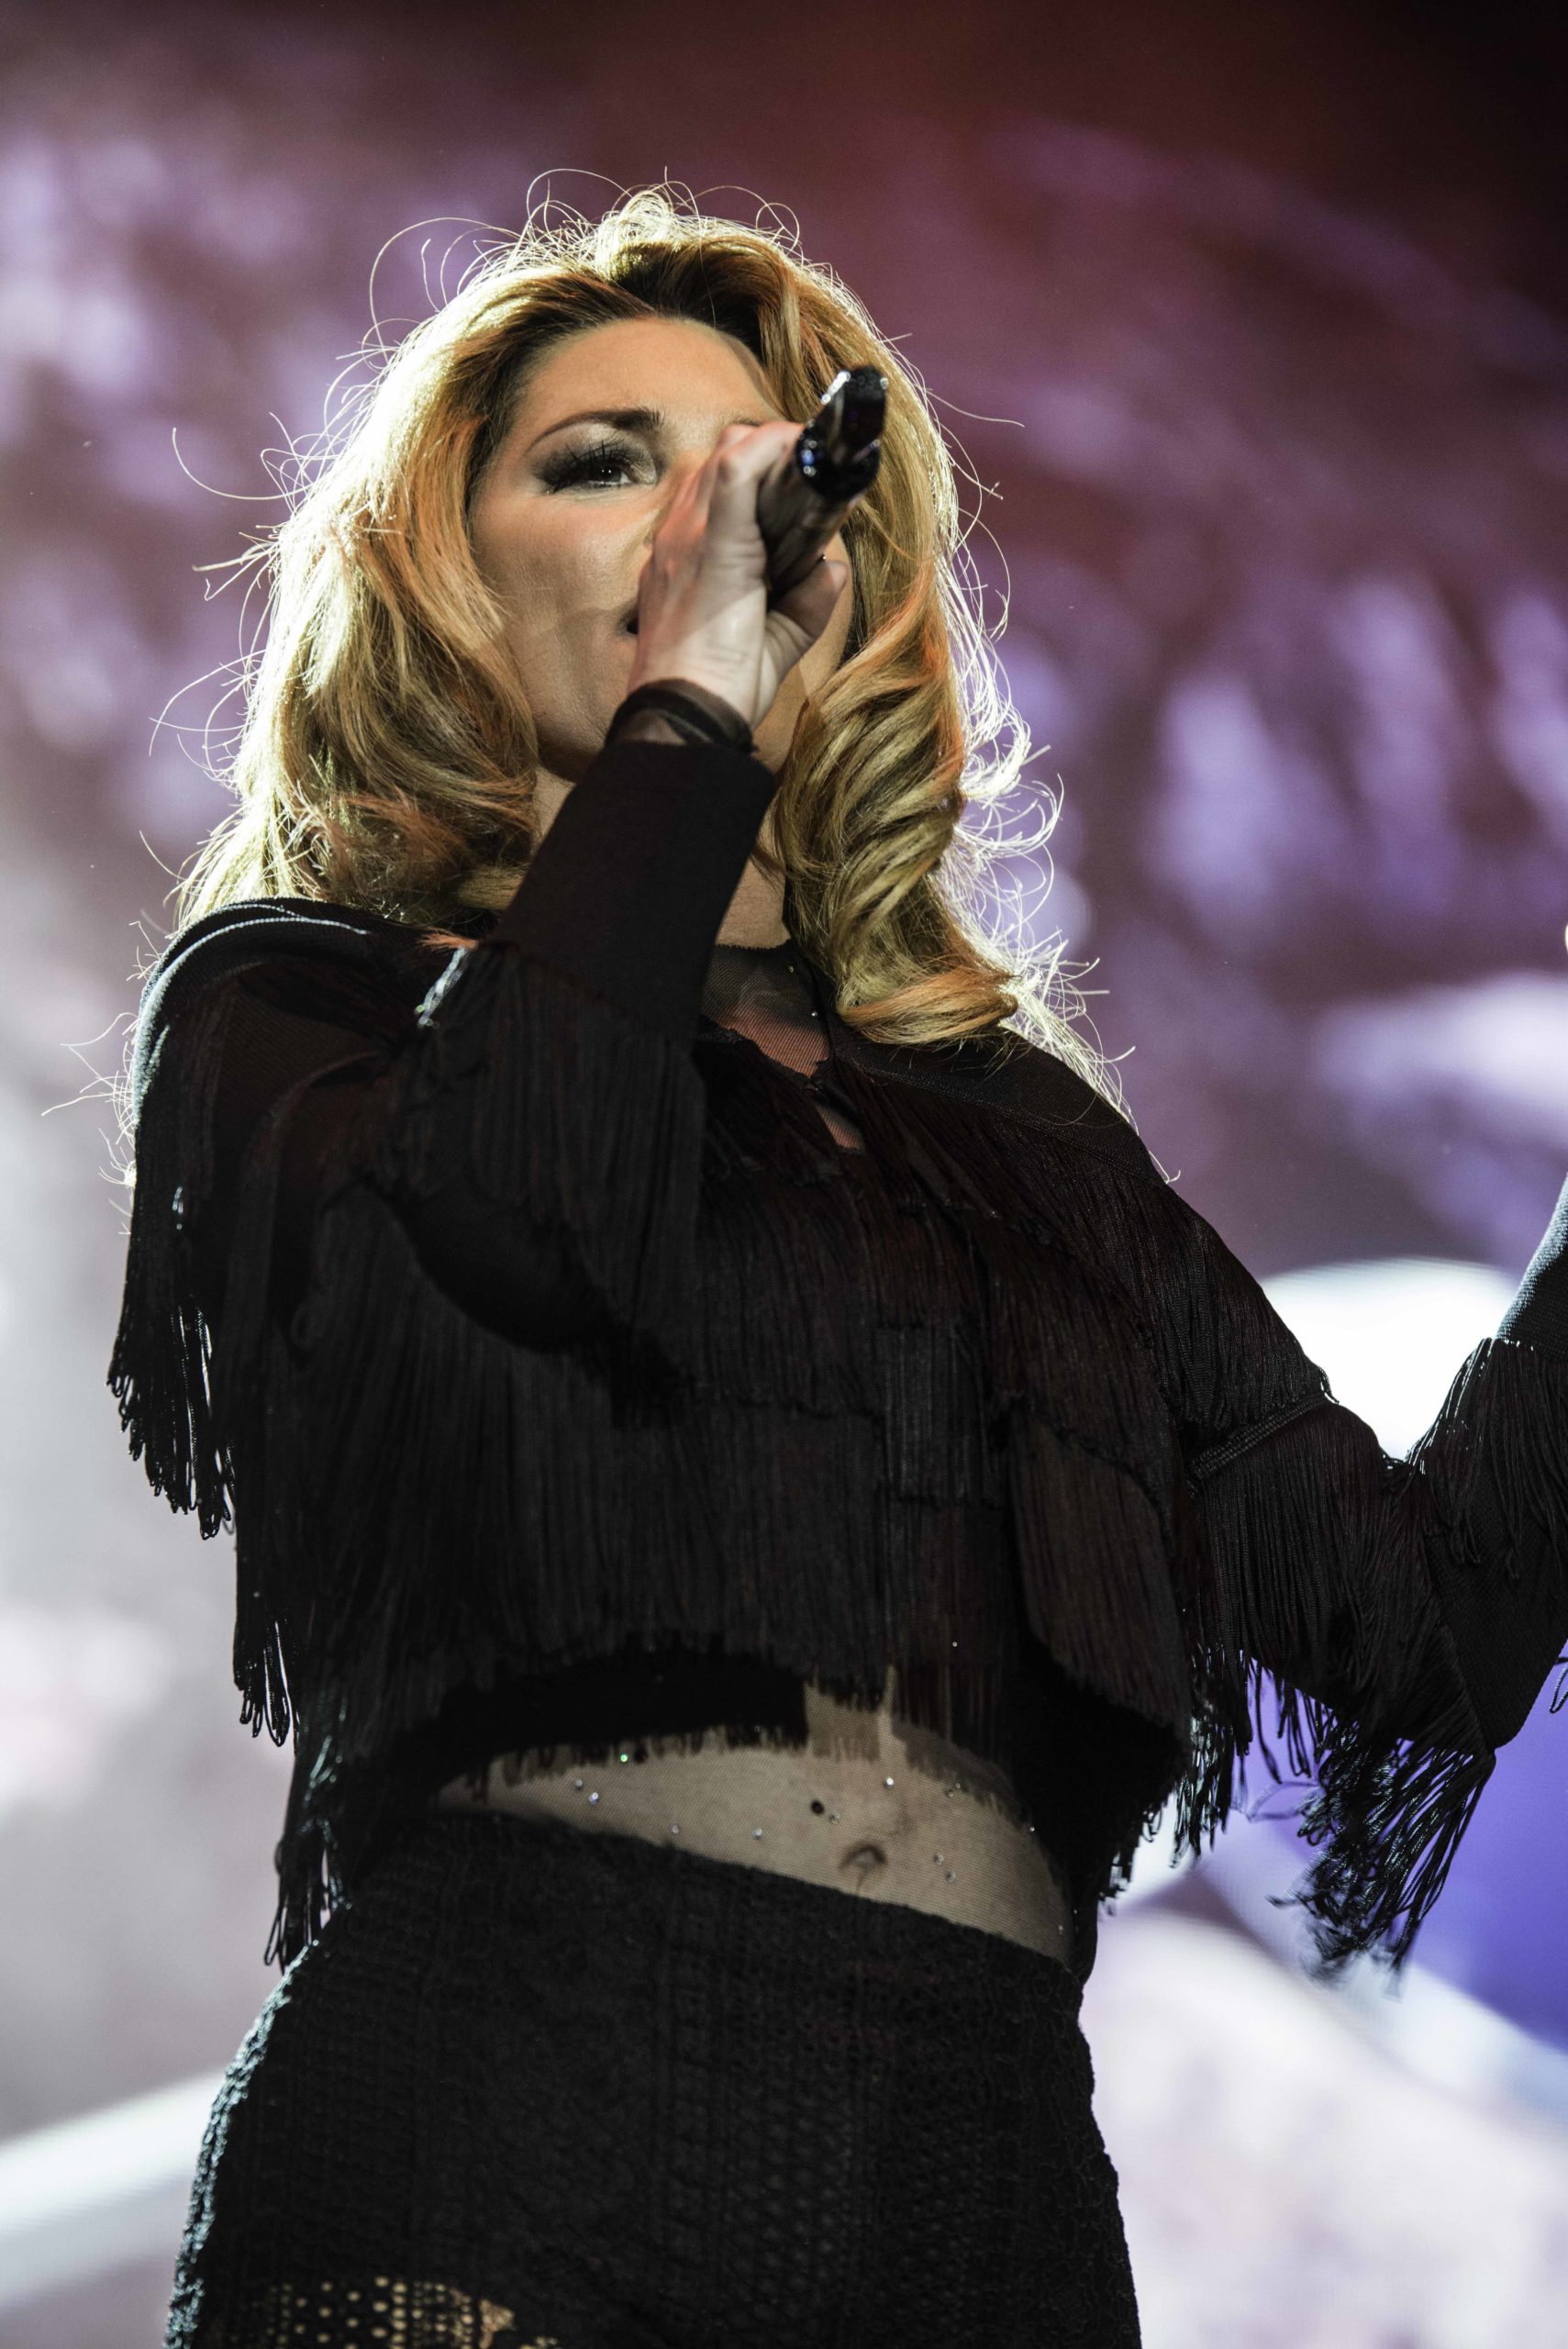 images/Stagecoach 2017 Day 2/Shania Twain 3